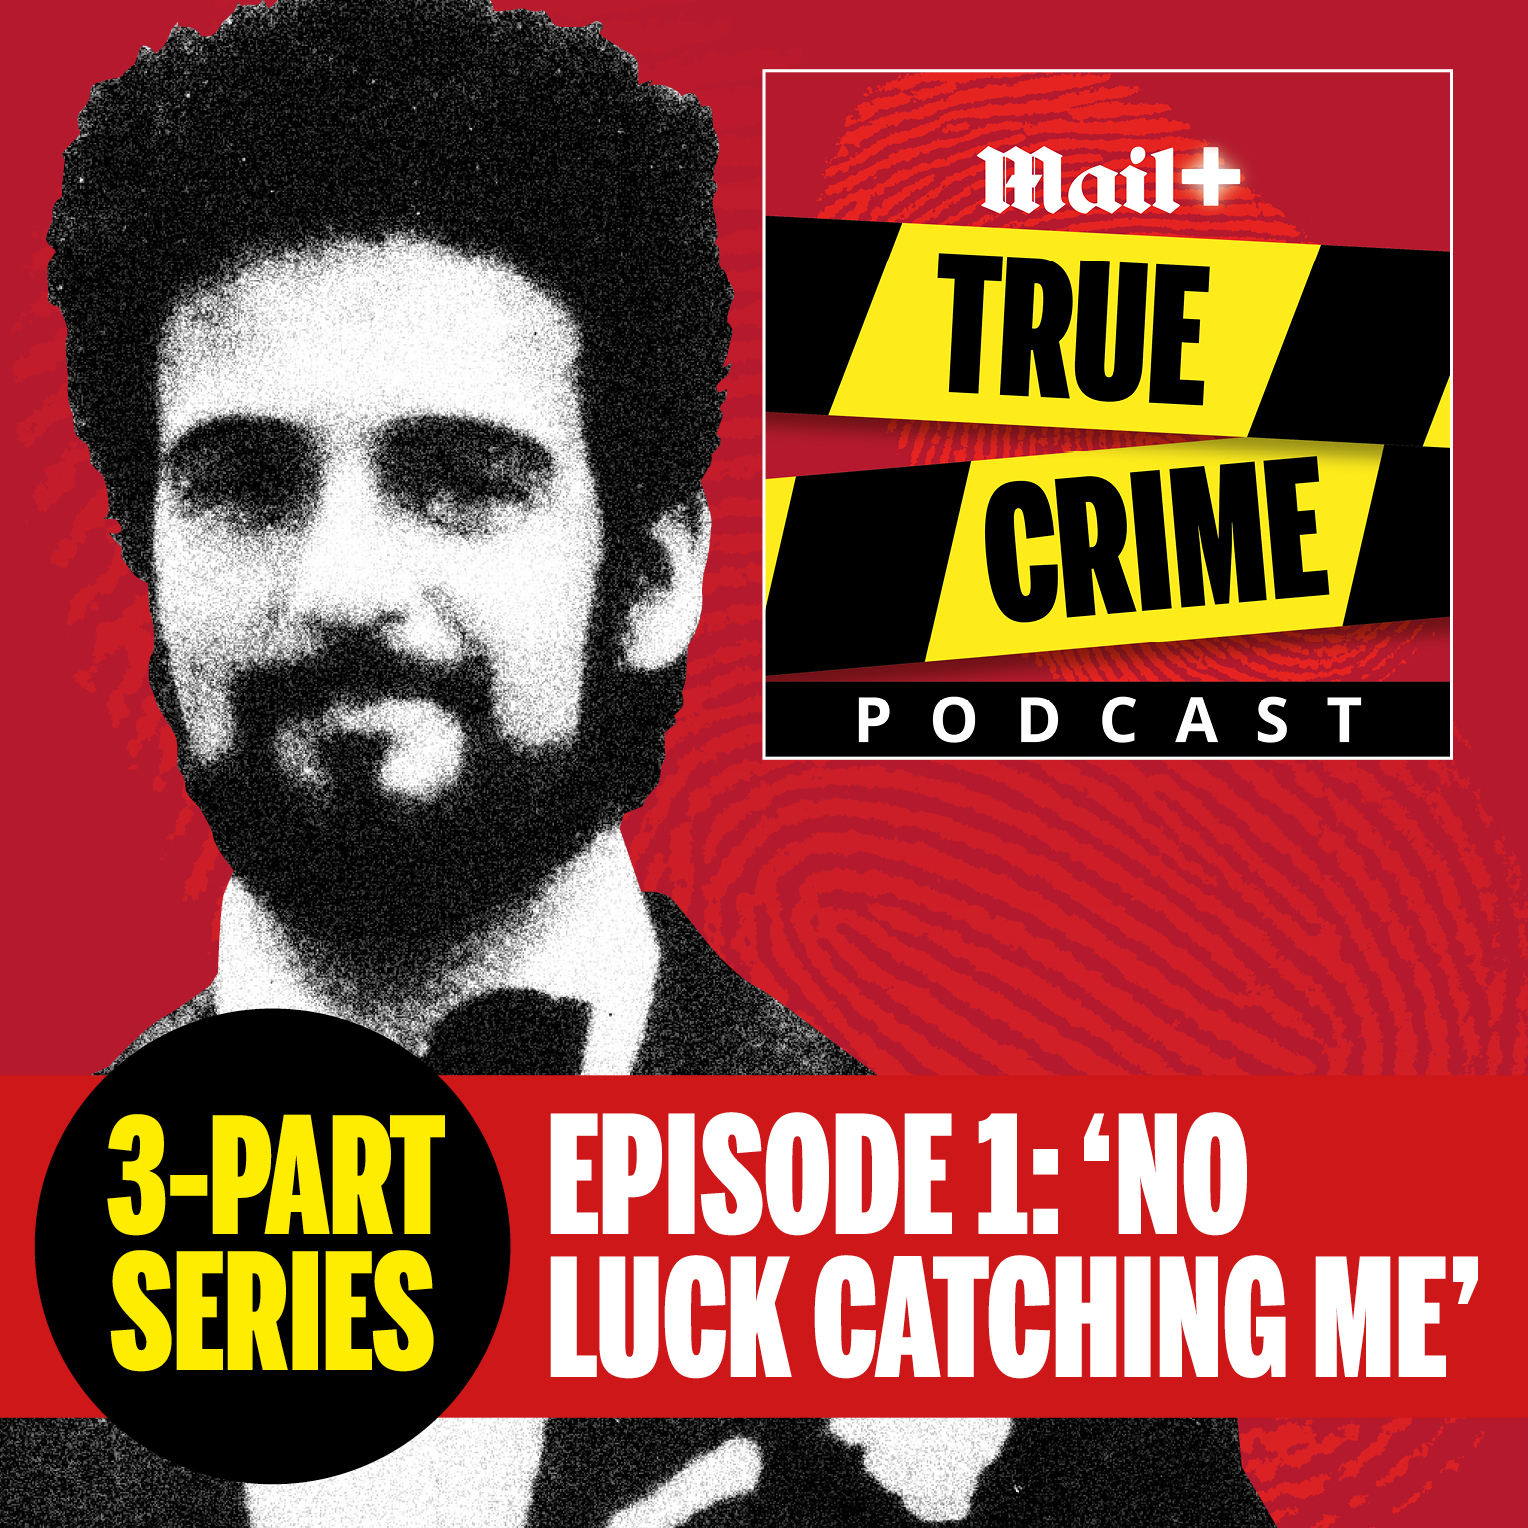 The Yorkshire Ripper: A Detective's Story - Episode 1